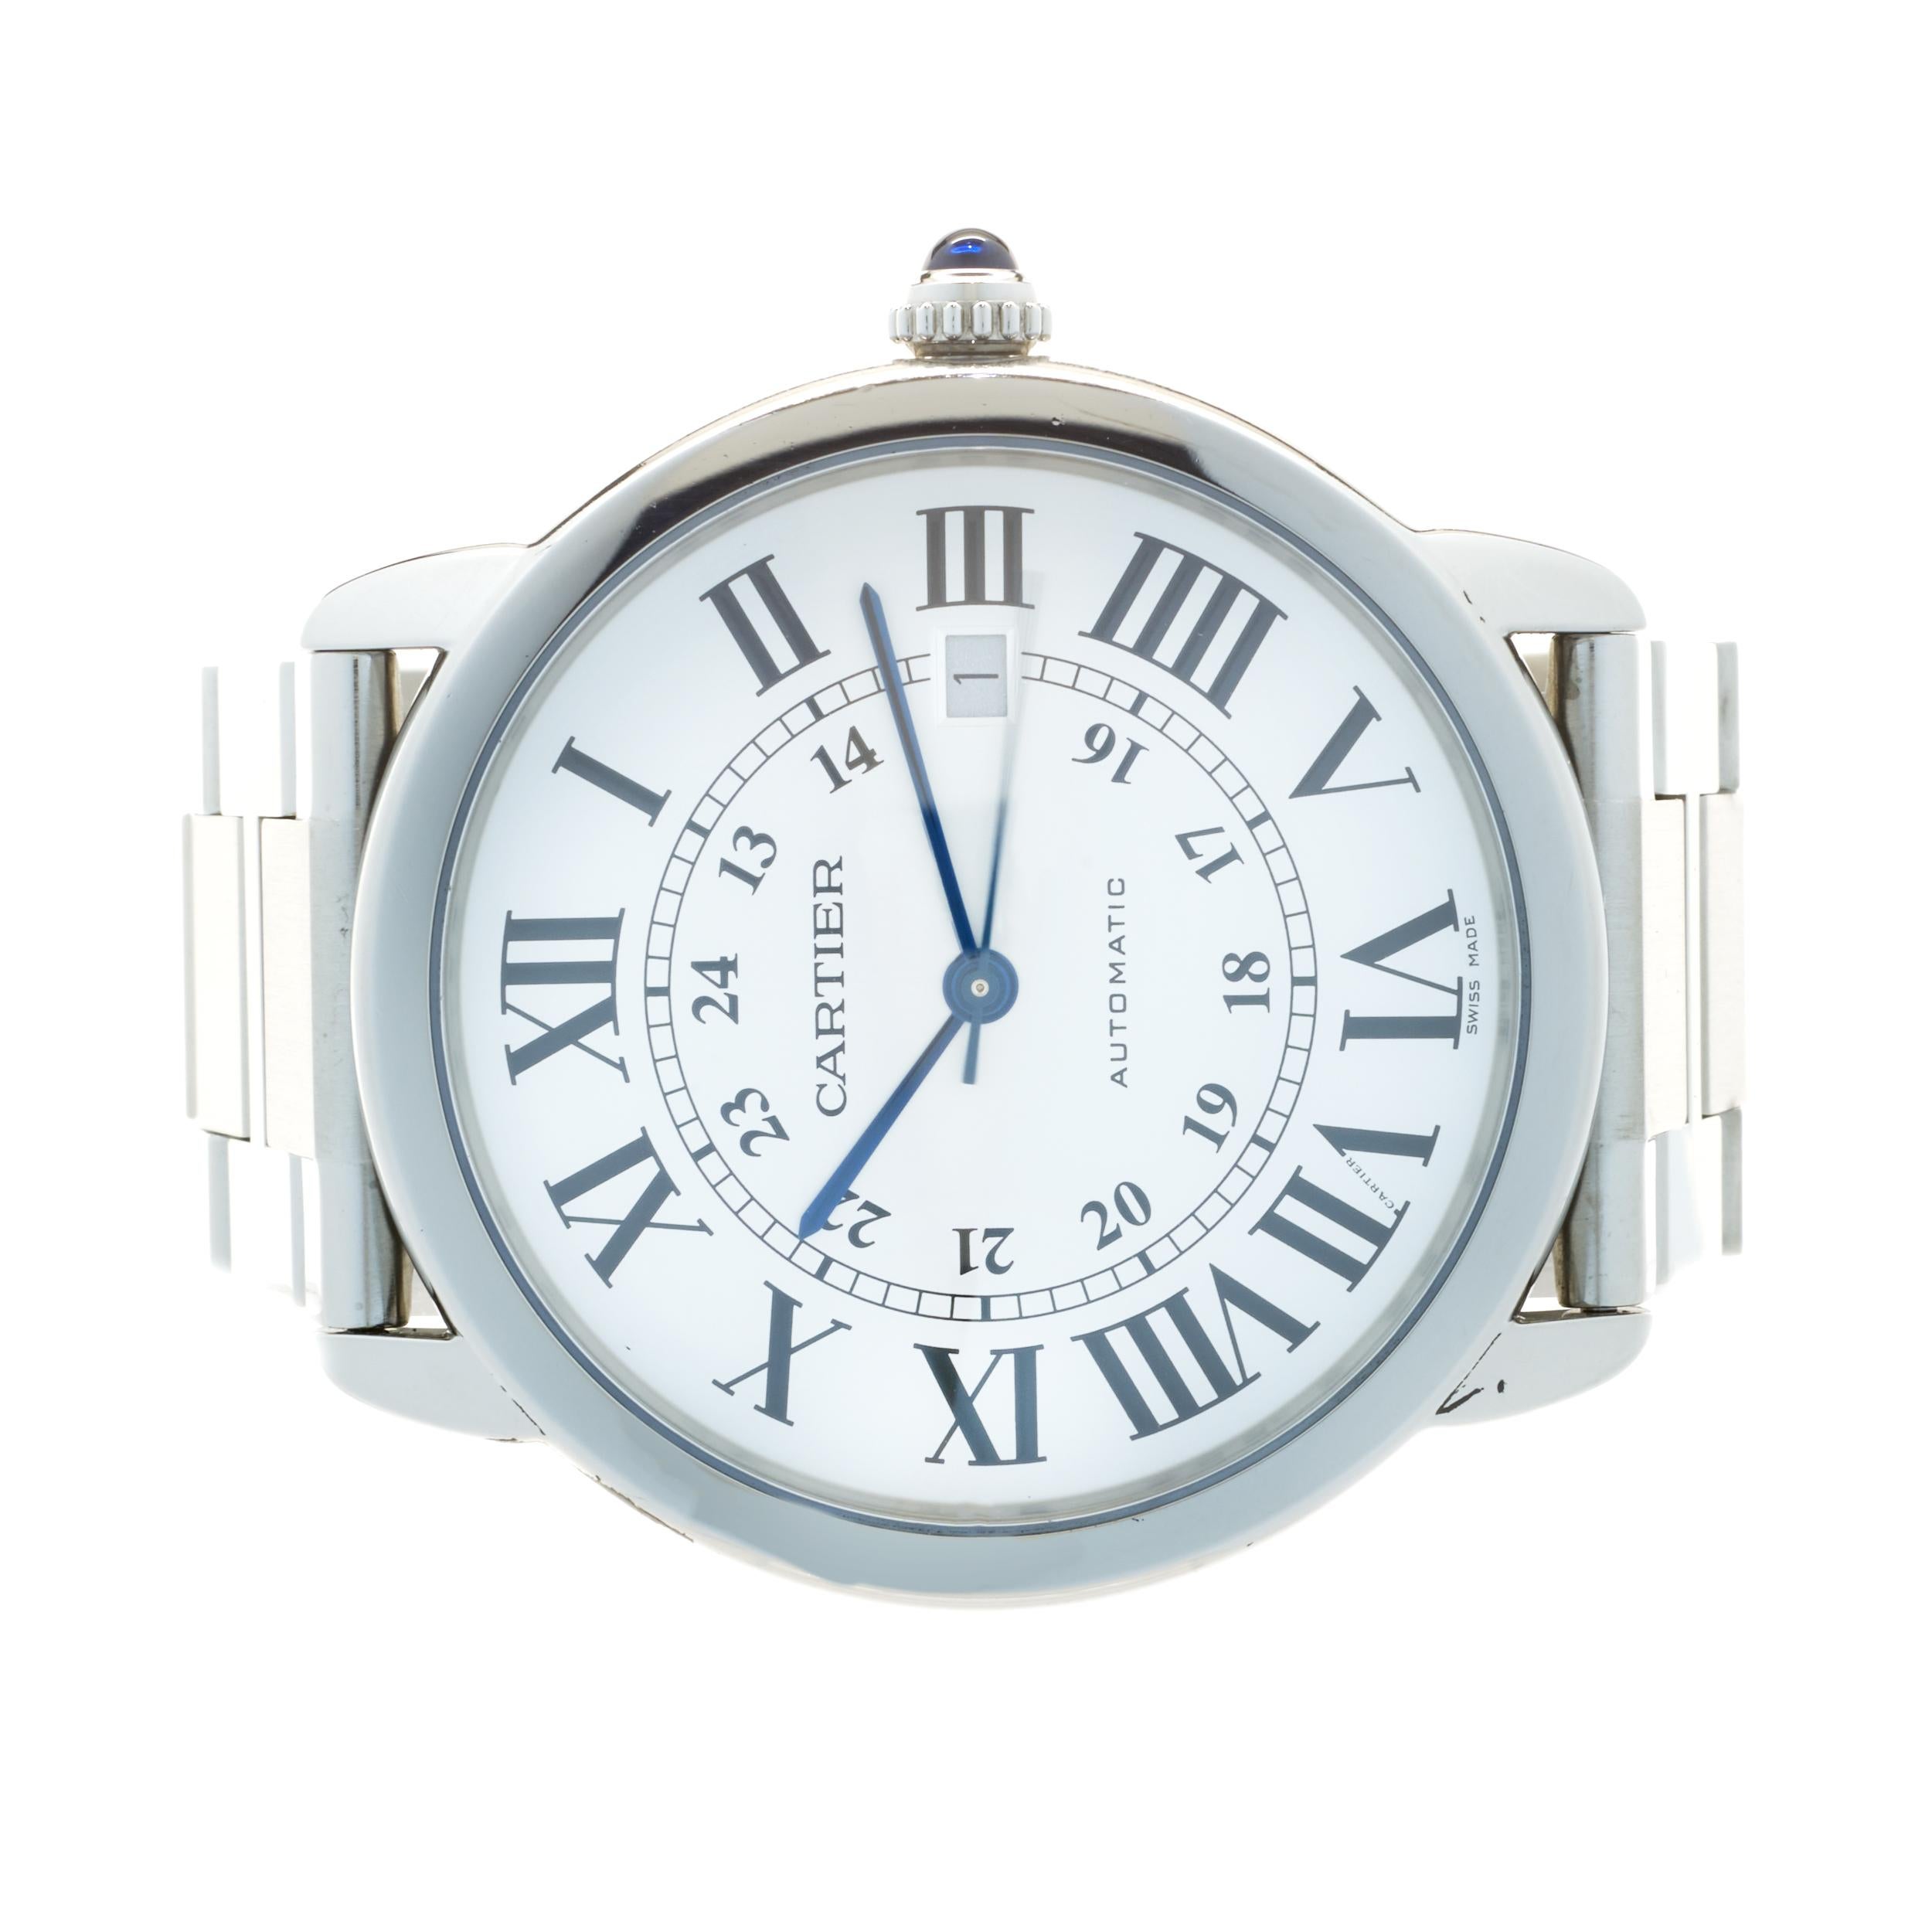 Movement: automatic
Function: hours, minutes, seconds, date
Case: 42mm stainless steel round case, push pull crown, sapphire crystal
Dial: silver roman dial, blue sword sweeping hands
Band: stainless steel Cartier bracelet, fold over clasp
Serial #: